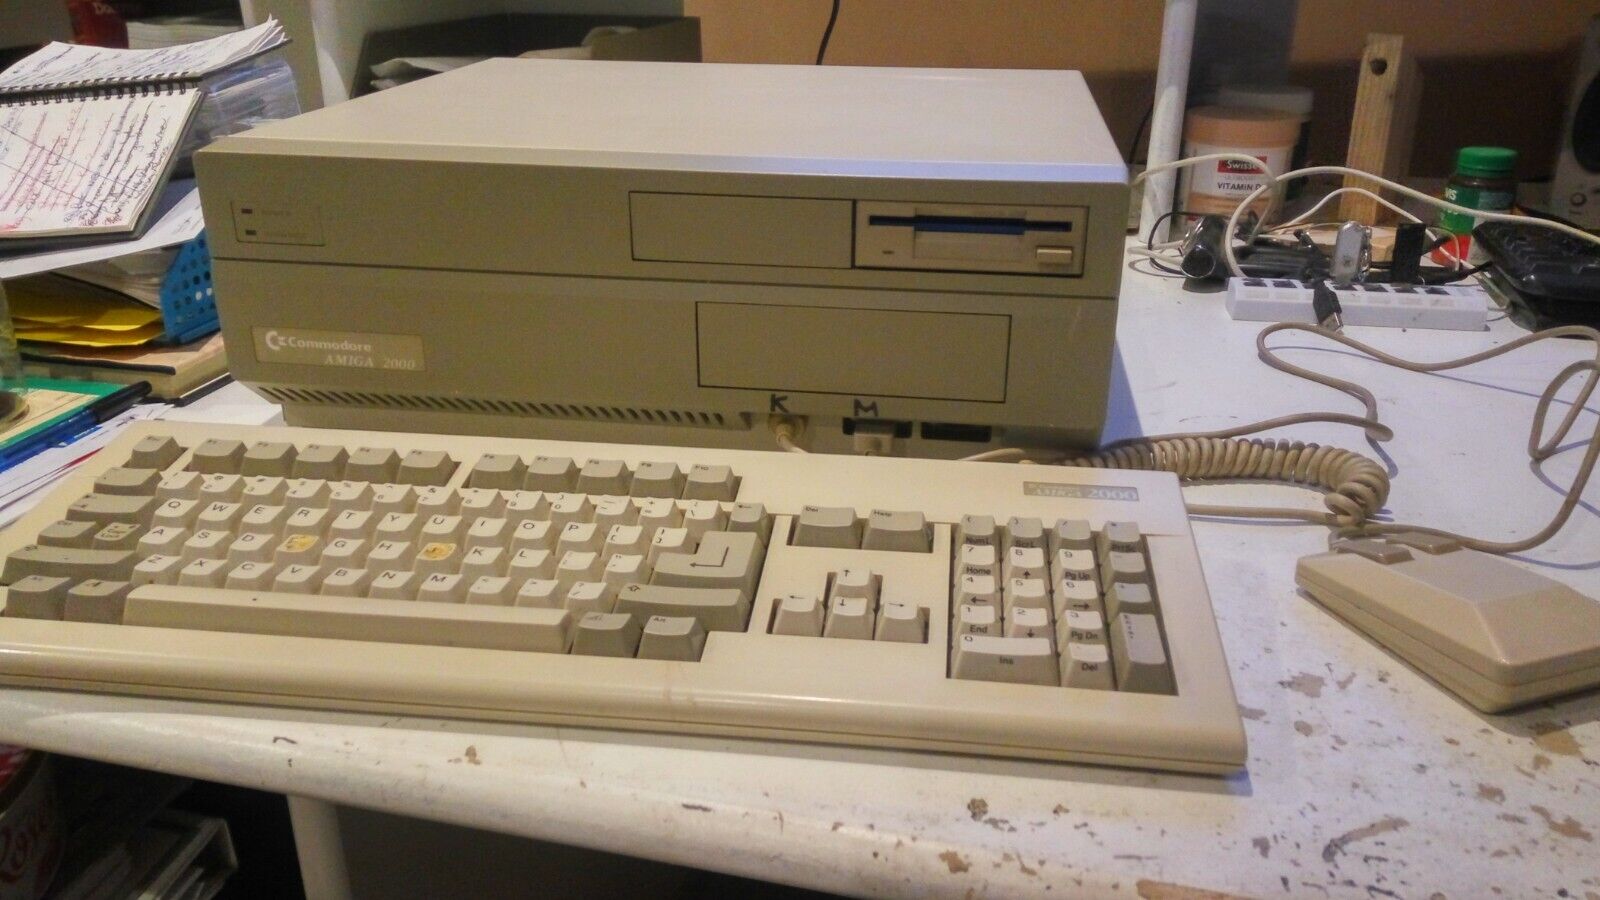 PAL Amiga 2000 fully working  (with non working A2286 as a freebie).